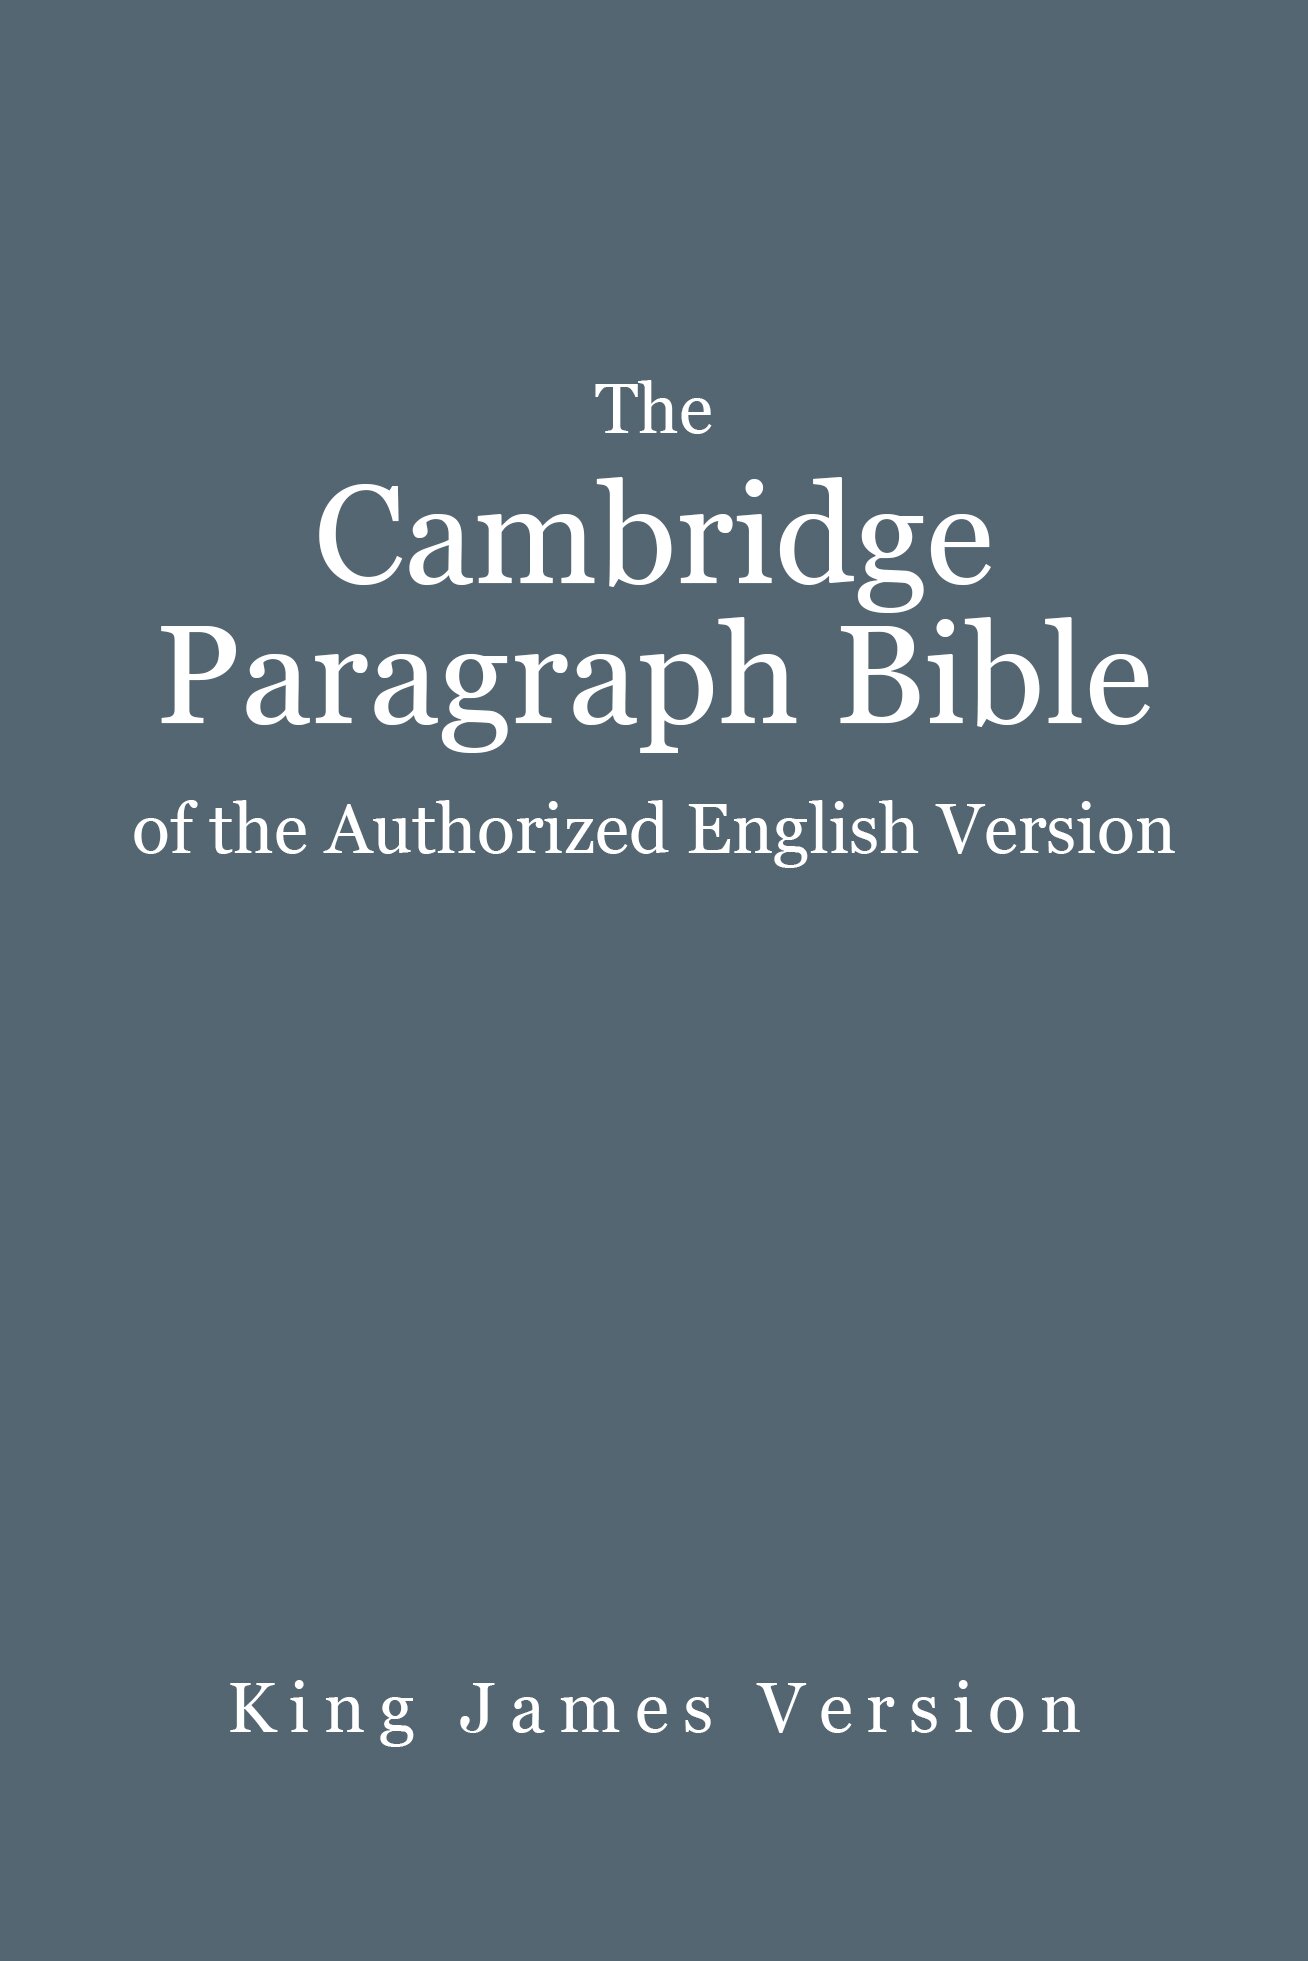 The Cambridge Paragraph Bible of the Authorized English Version (KJV)